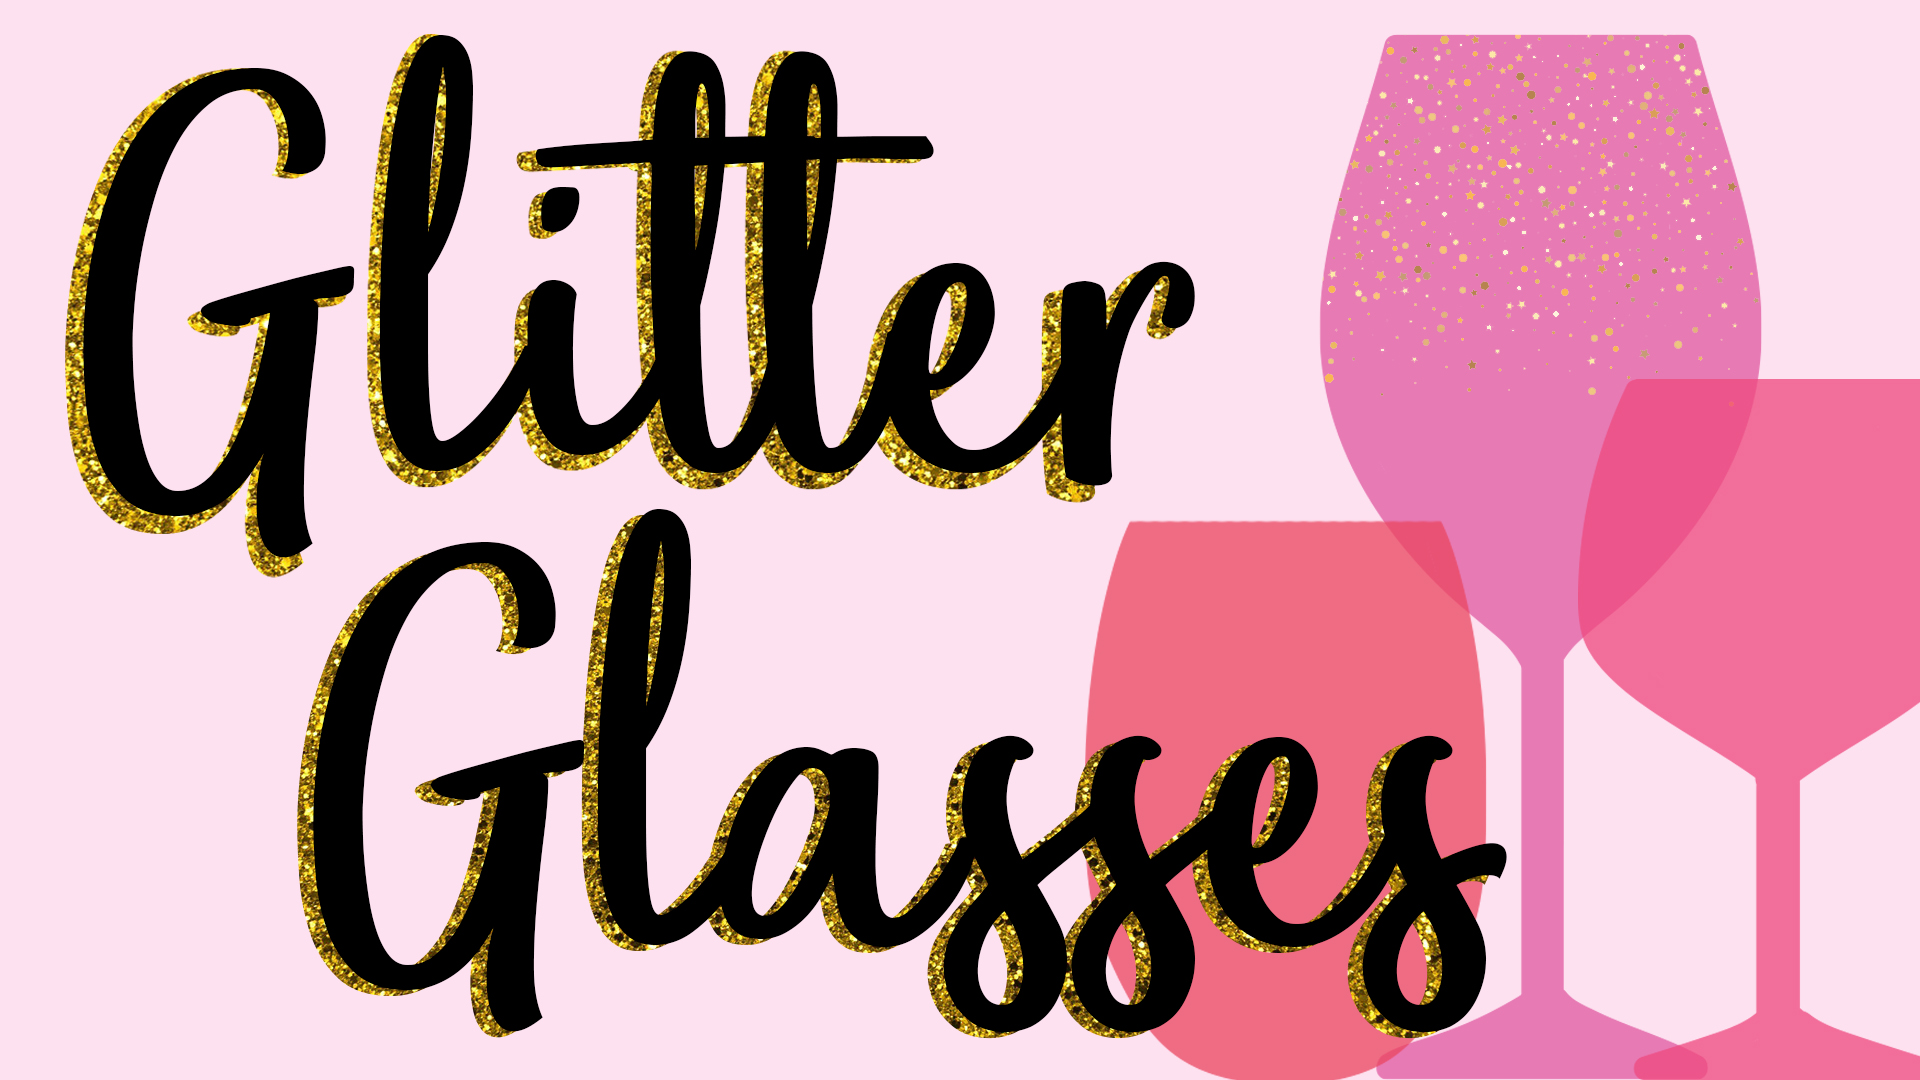 Image read "Glitter Glass" with a light pink background and 3 different colored pink wine glasses to the right.